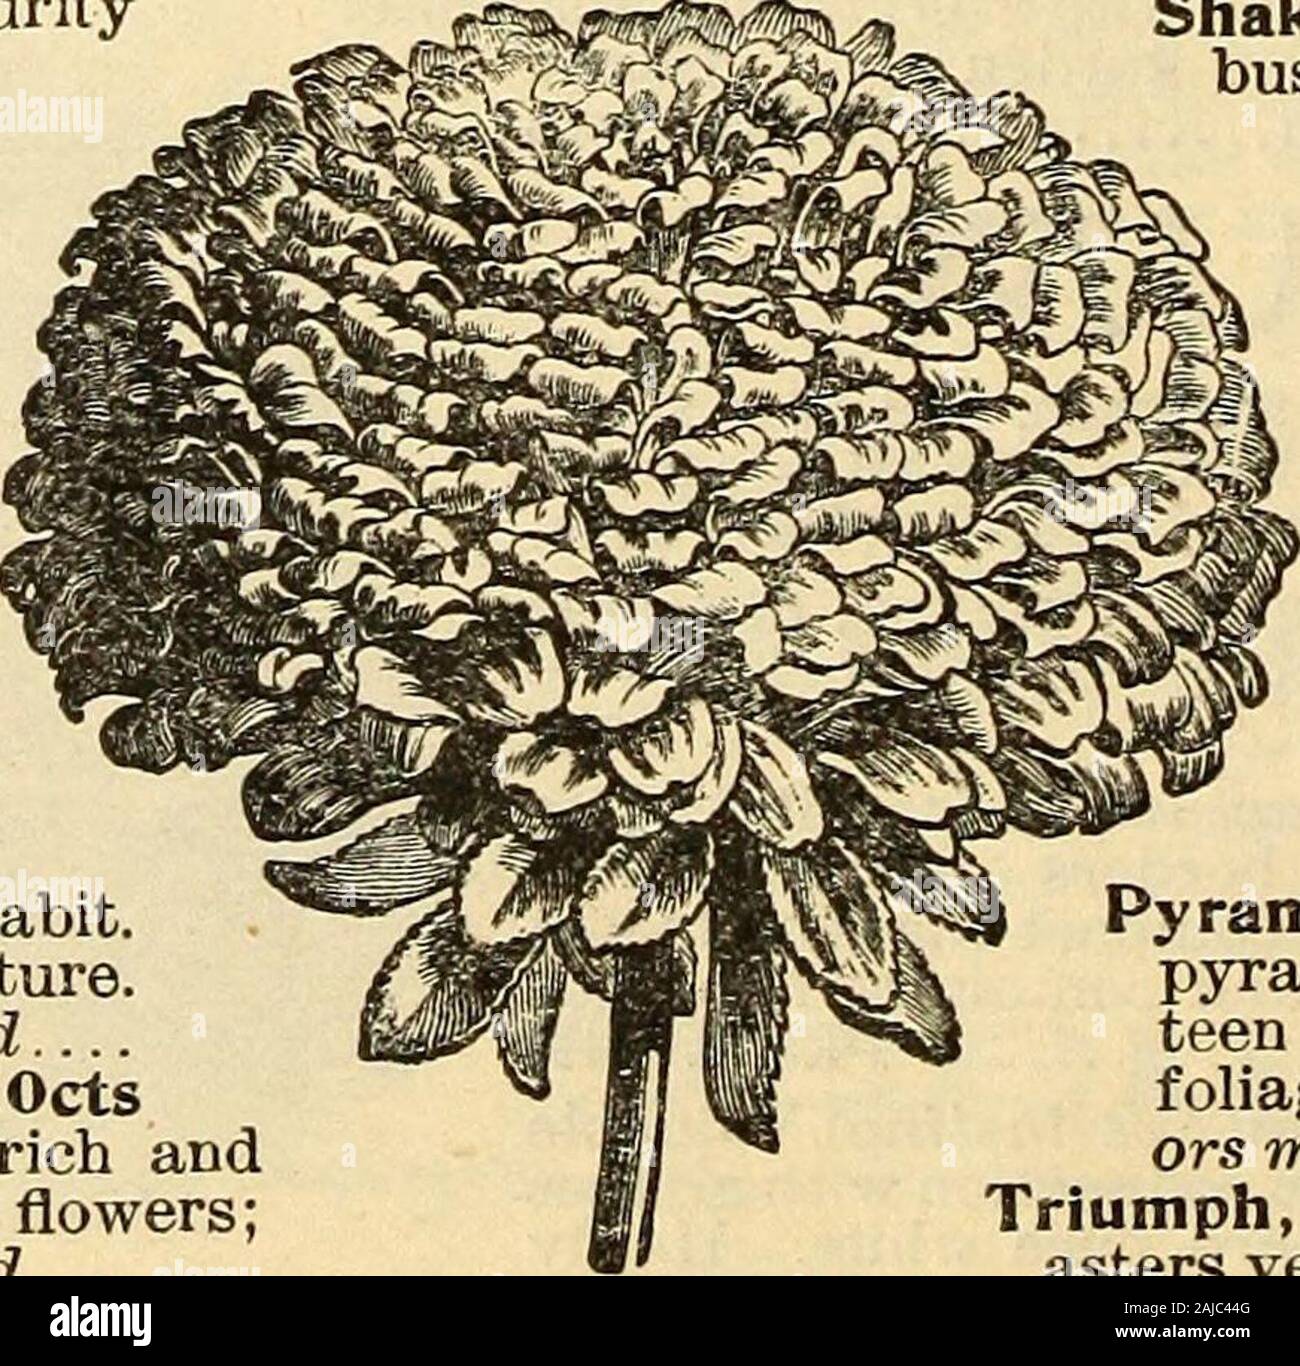 Seed annual . Shakespeare, mixed, plants form compact bushes, ten to twelve inches in diameter, and about nine inches high. Extremely handsome; very double. All colors mixed Pkt. 15cts Very Dwarf, or Pygmasa. This beauti-ful gem is very dwarf and forms acharming tuft of leaves close to theground, surmounted by bright, perfect flowers. Various colors mixed Pkt. lOcts Dwarf Chrysanthemum, flowers large, about three inches in diameter; height about one foot; this is a late variety. All colors mixed Pkt. lOcts Pyramidal Bouquet, dwarf, forming a completepyramidal shaped bouquet, carrying from fif- Stock Photo